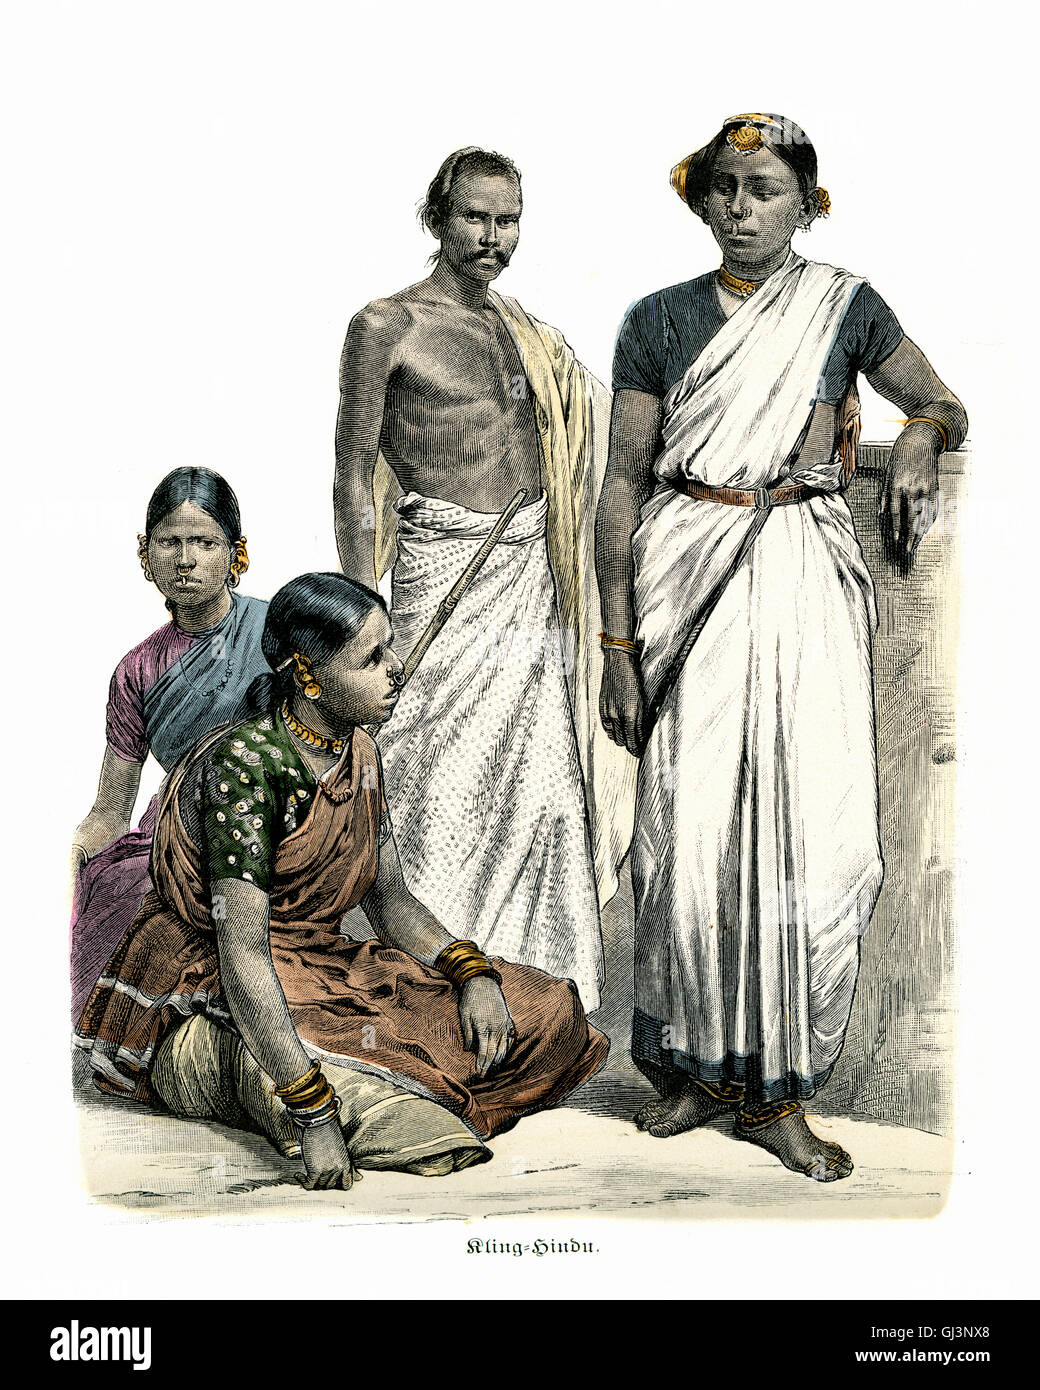 Costumes of East India, 19th Century. Keling, Hindus. Keling is a word used to describe people originating from the Indian subco Stock Photo